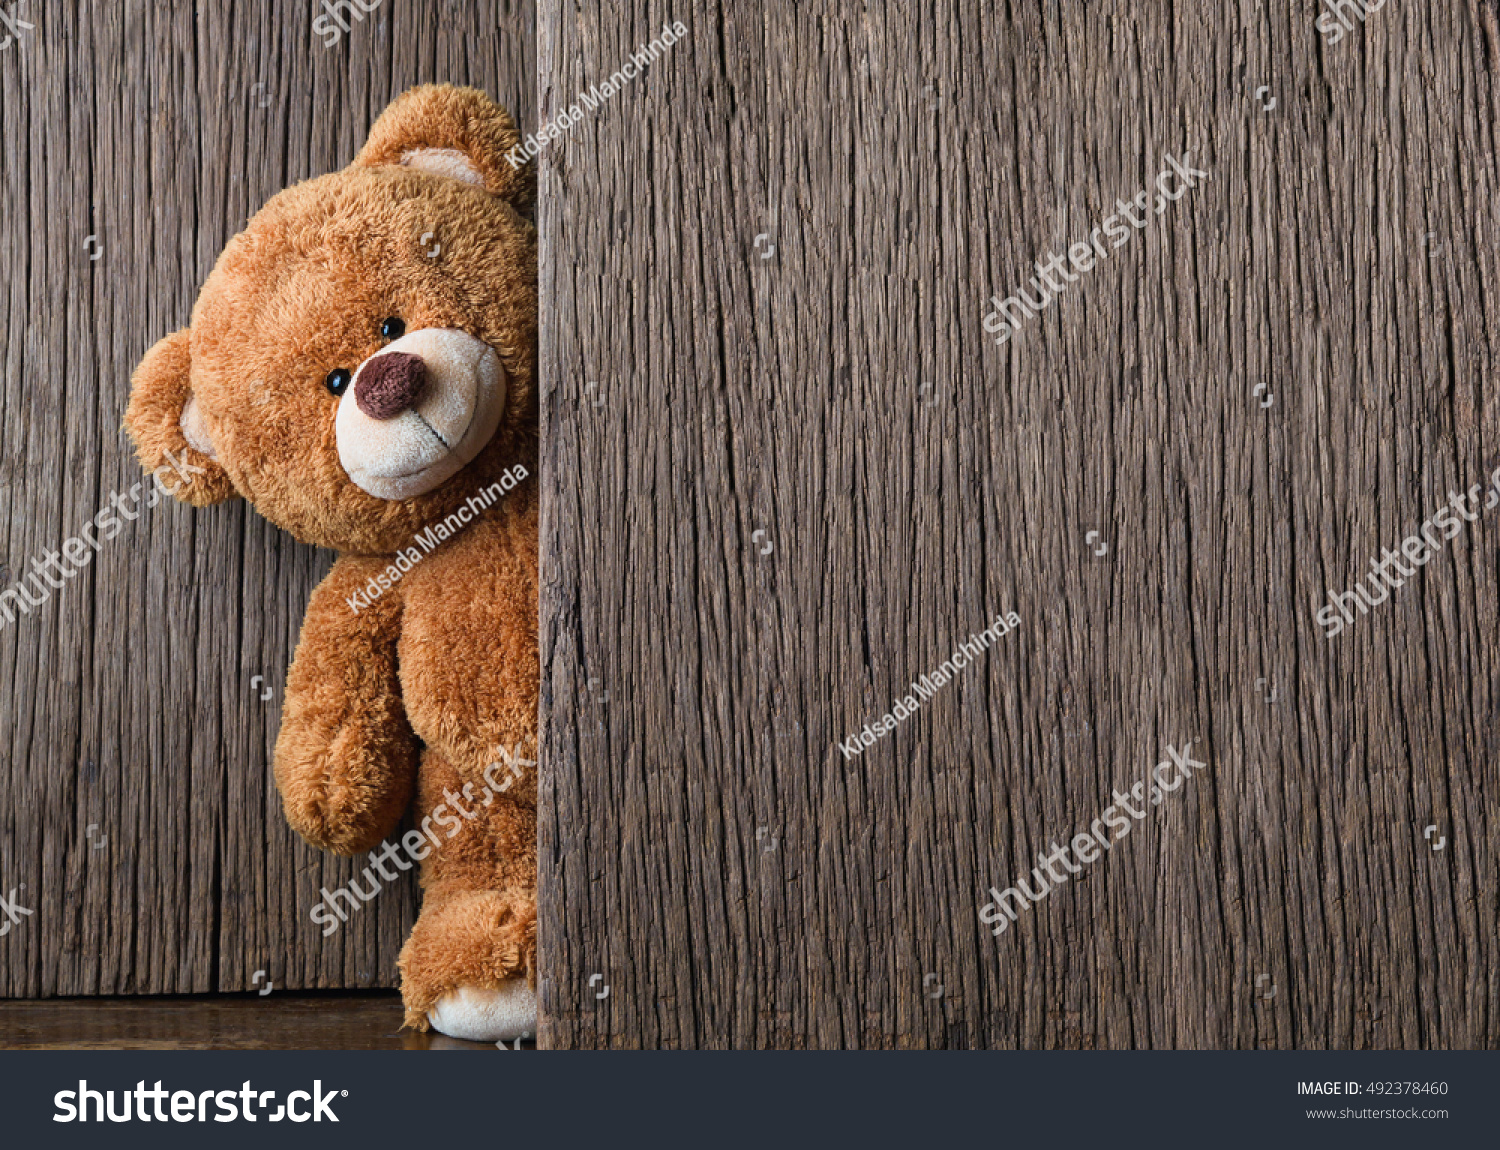 Cute teddy bear on old wood background with copy space #492378460